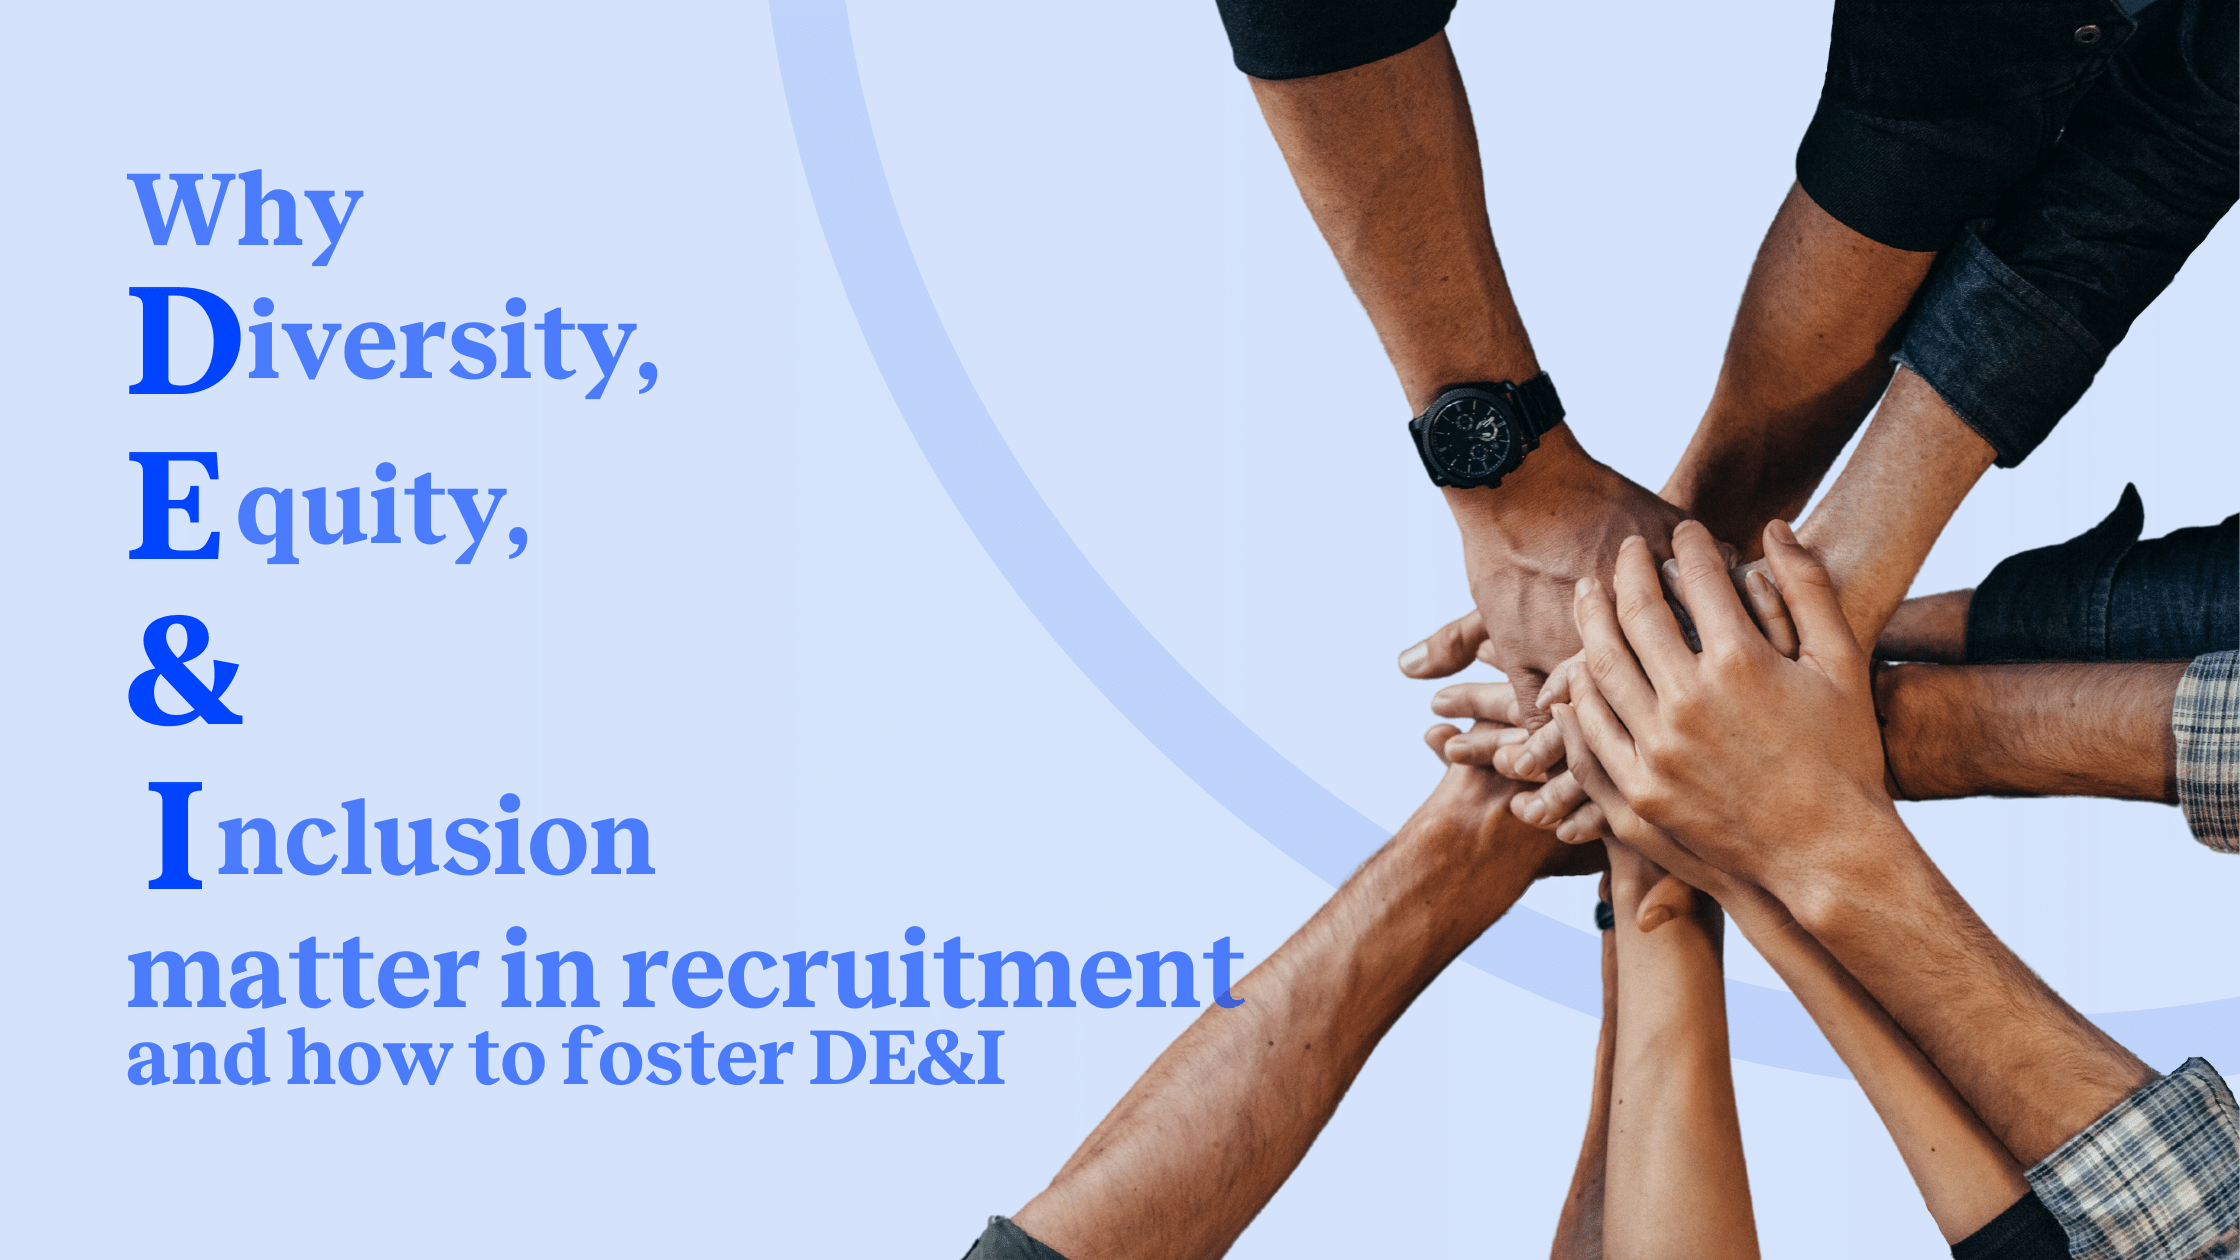 Why diversity, equity, and inclusion (DE&I) matters in recruitment—and how to foster it